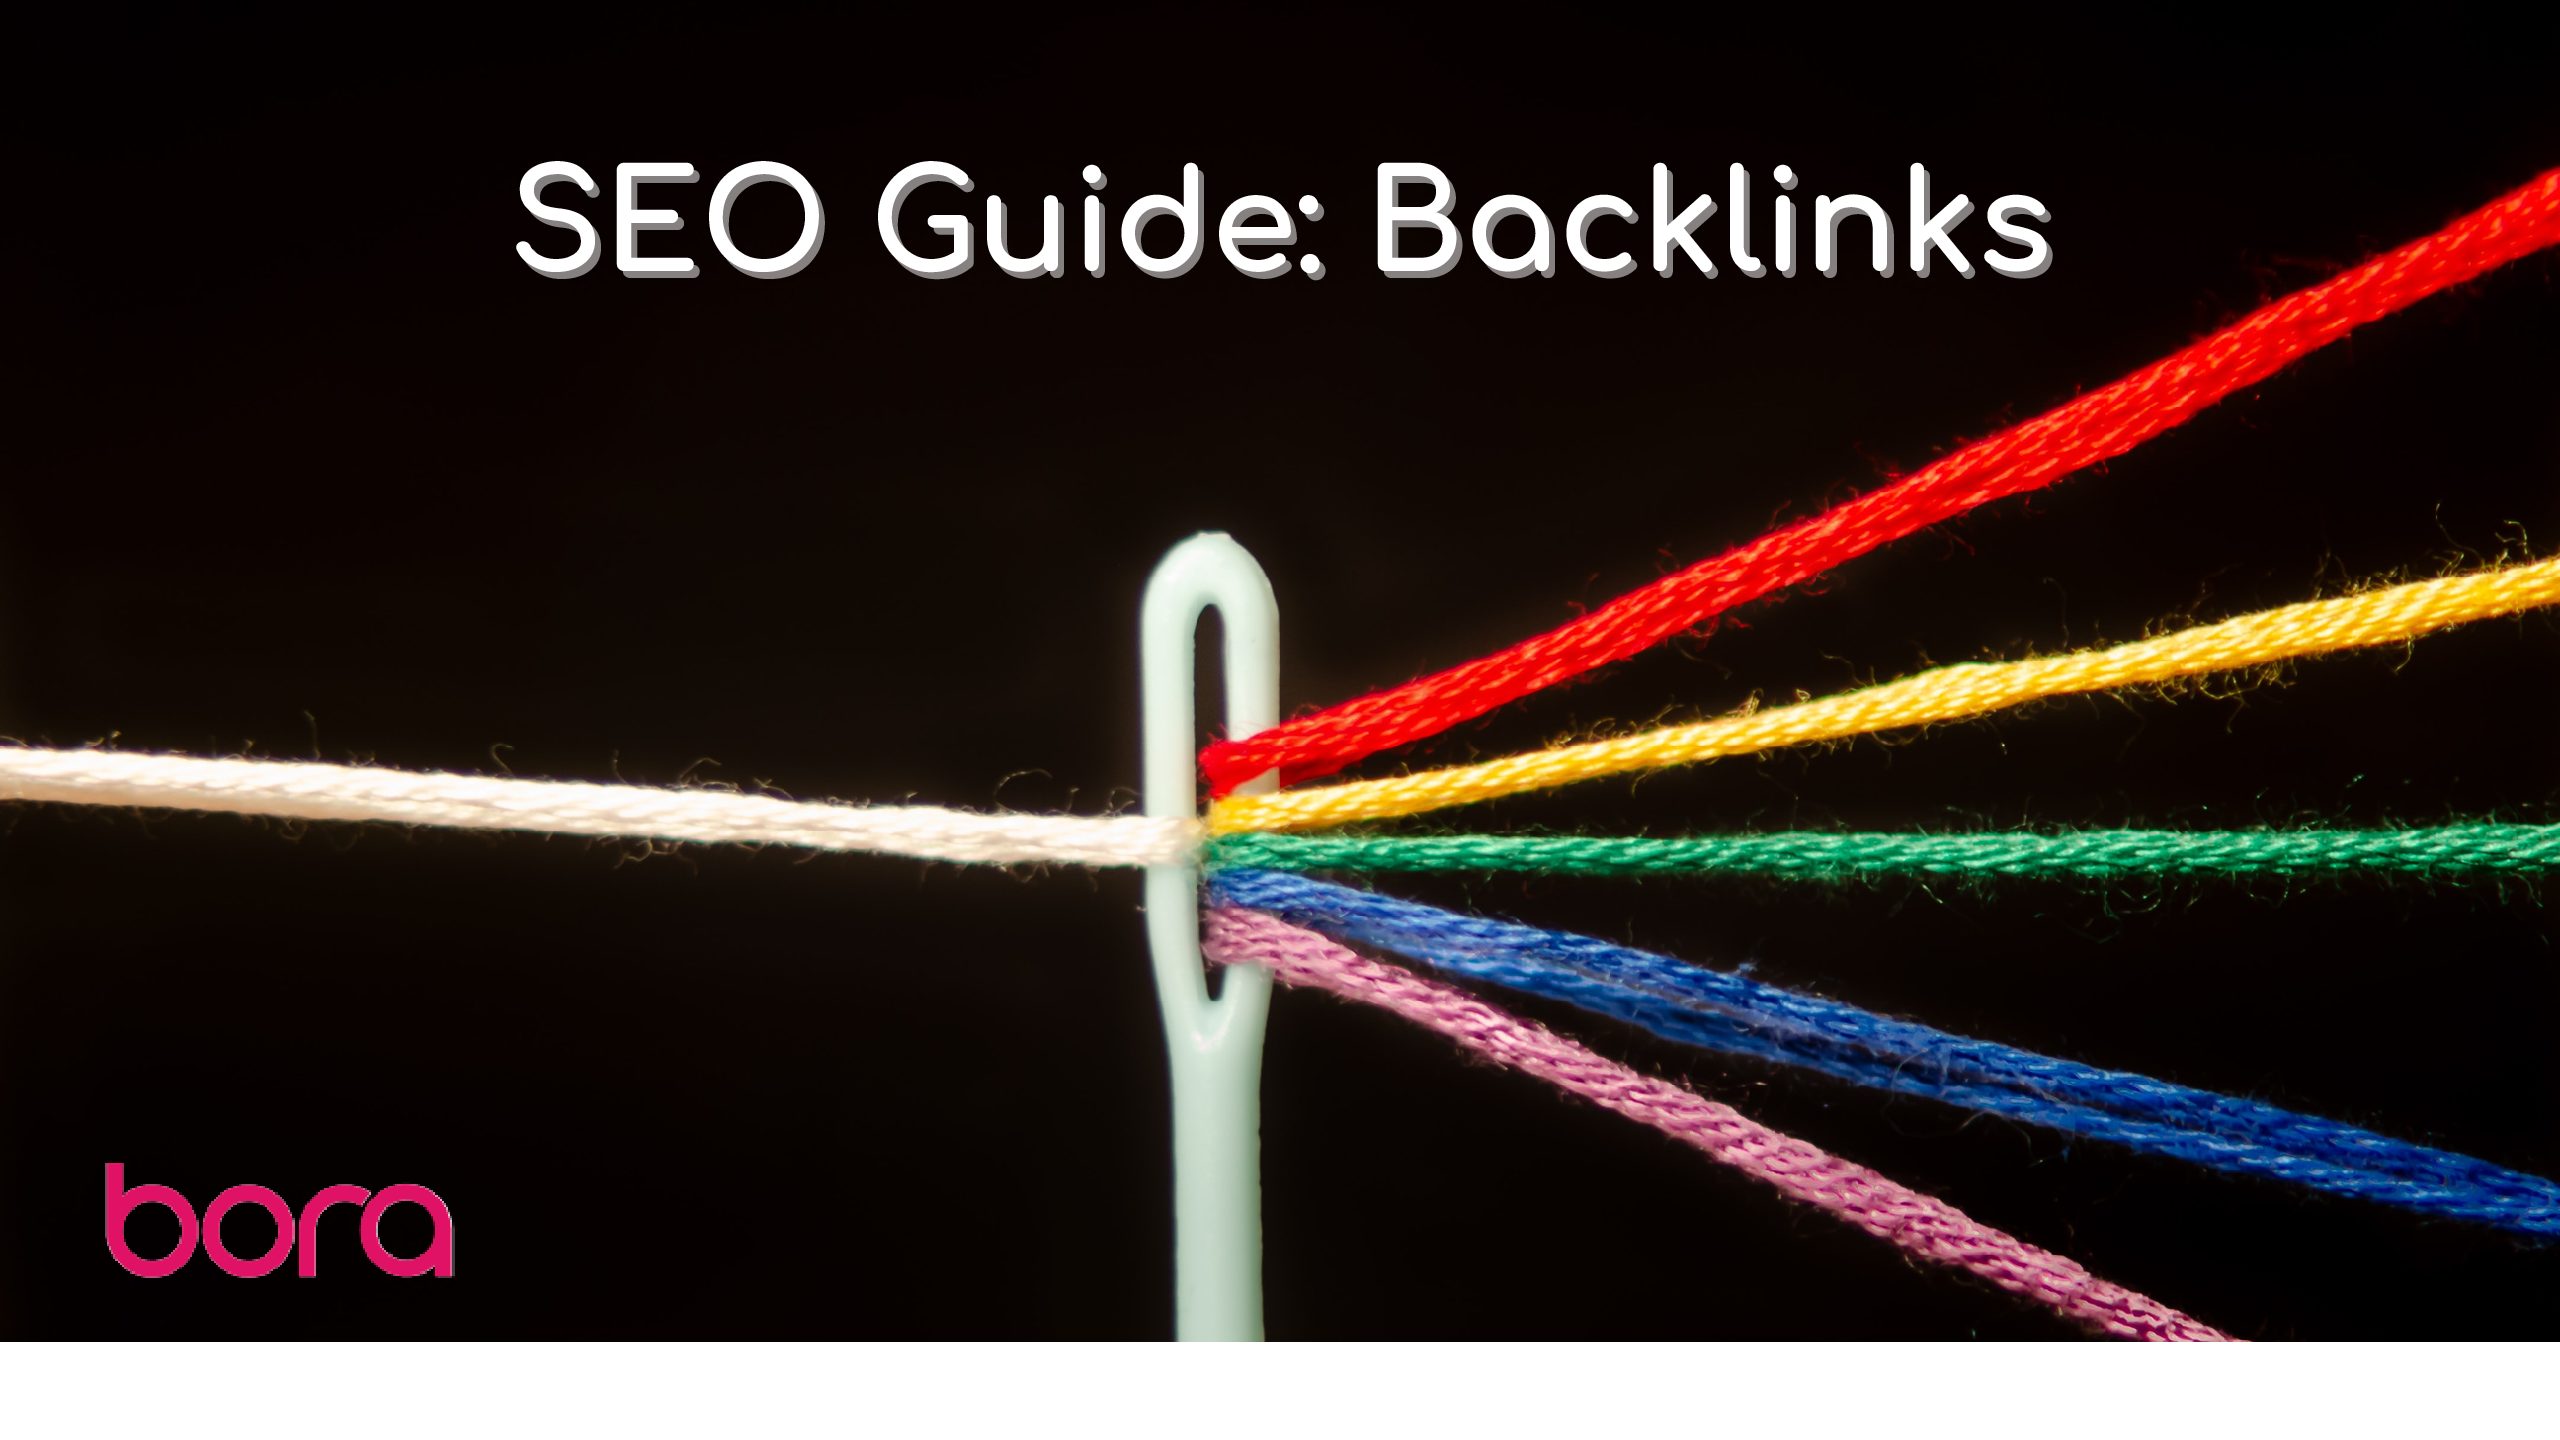 Backlinks: What are they? How can you manage them?